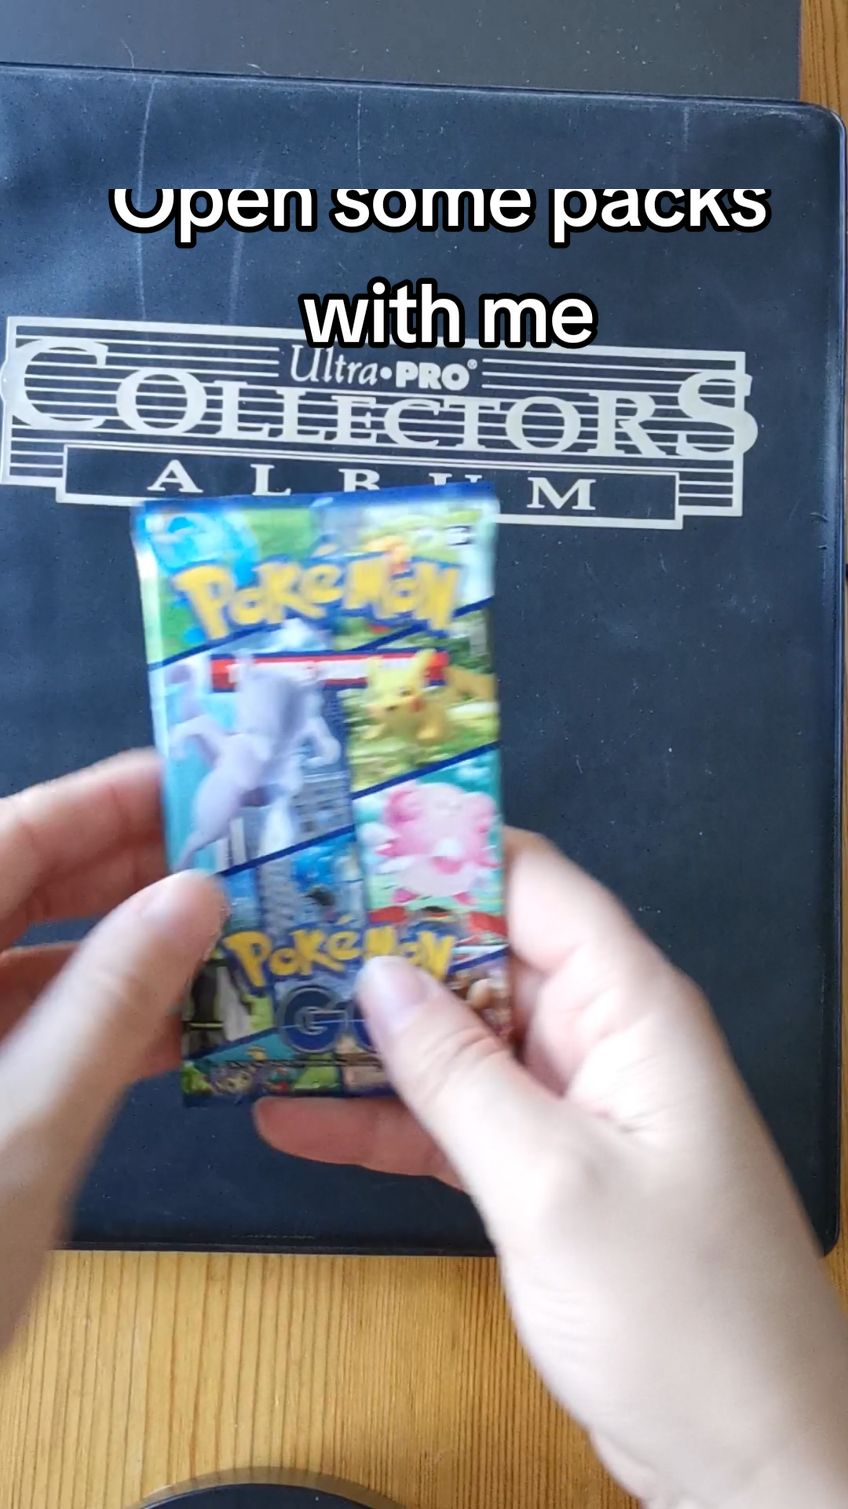 Come and open some card for my collection with me #pokemongo #shiny #tcg #pokemon #twitchstreamer #pokemontgc #pokemoncards 